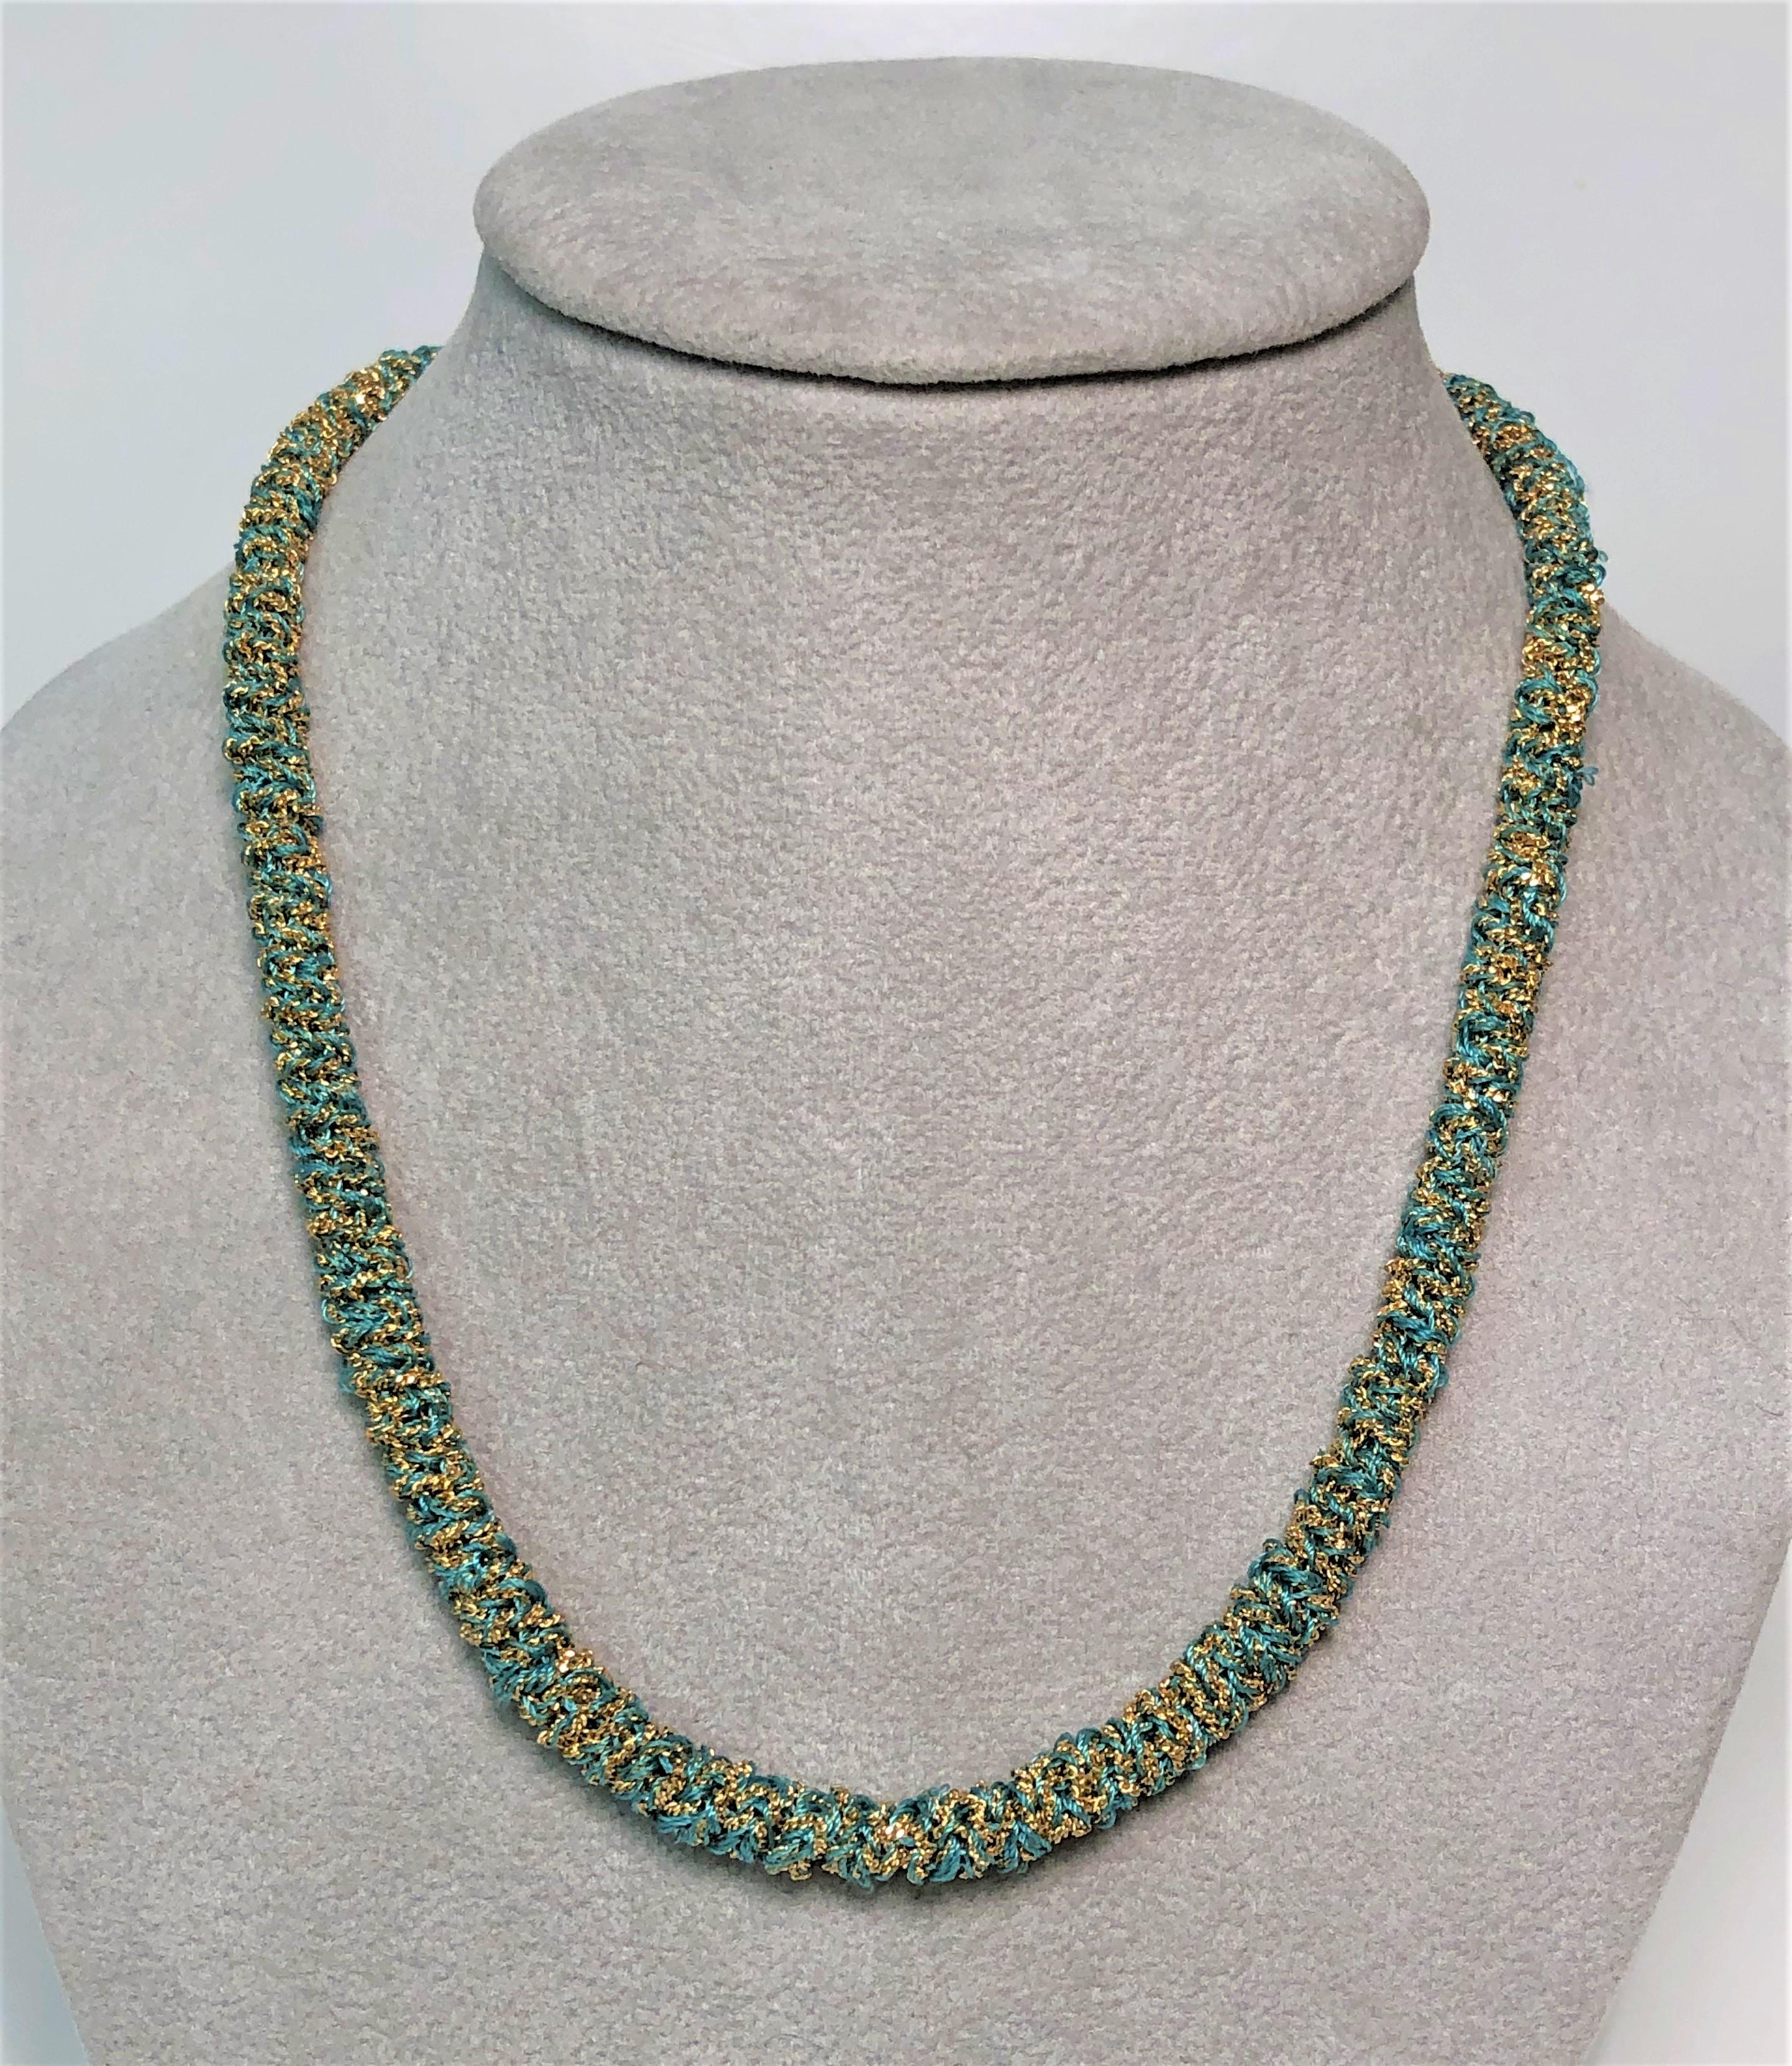 From designer Carolina Bucci, her design style really shows in this beautiful, easy to wear necklace.  
It can also be worn as a bracelet for a different look!
This has never been worn!
18 karat yellow gold woven with a turquoise color fabric.
18